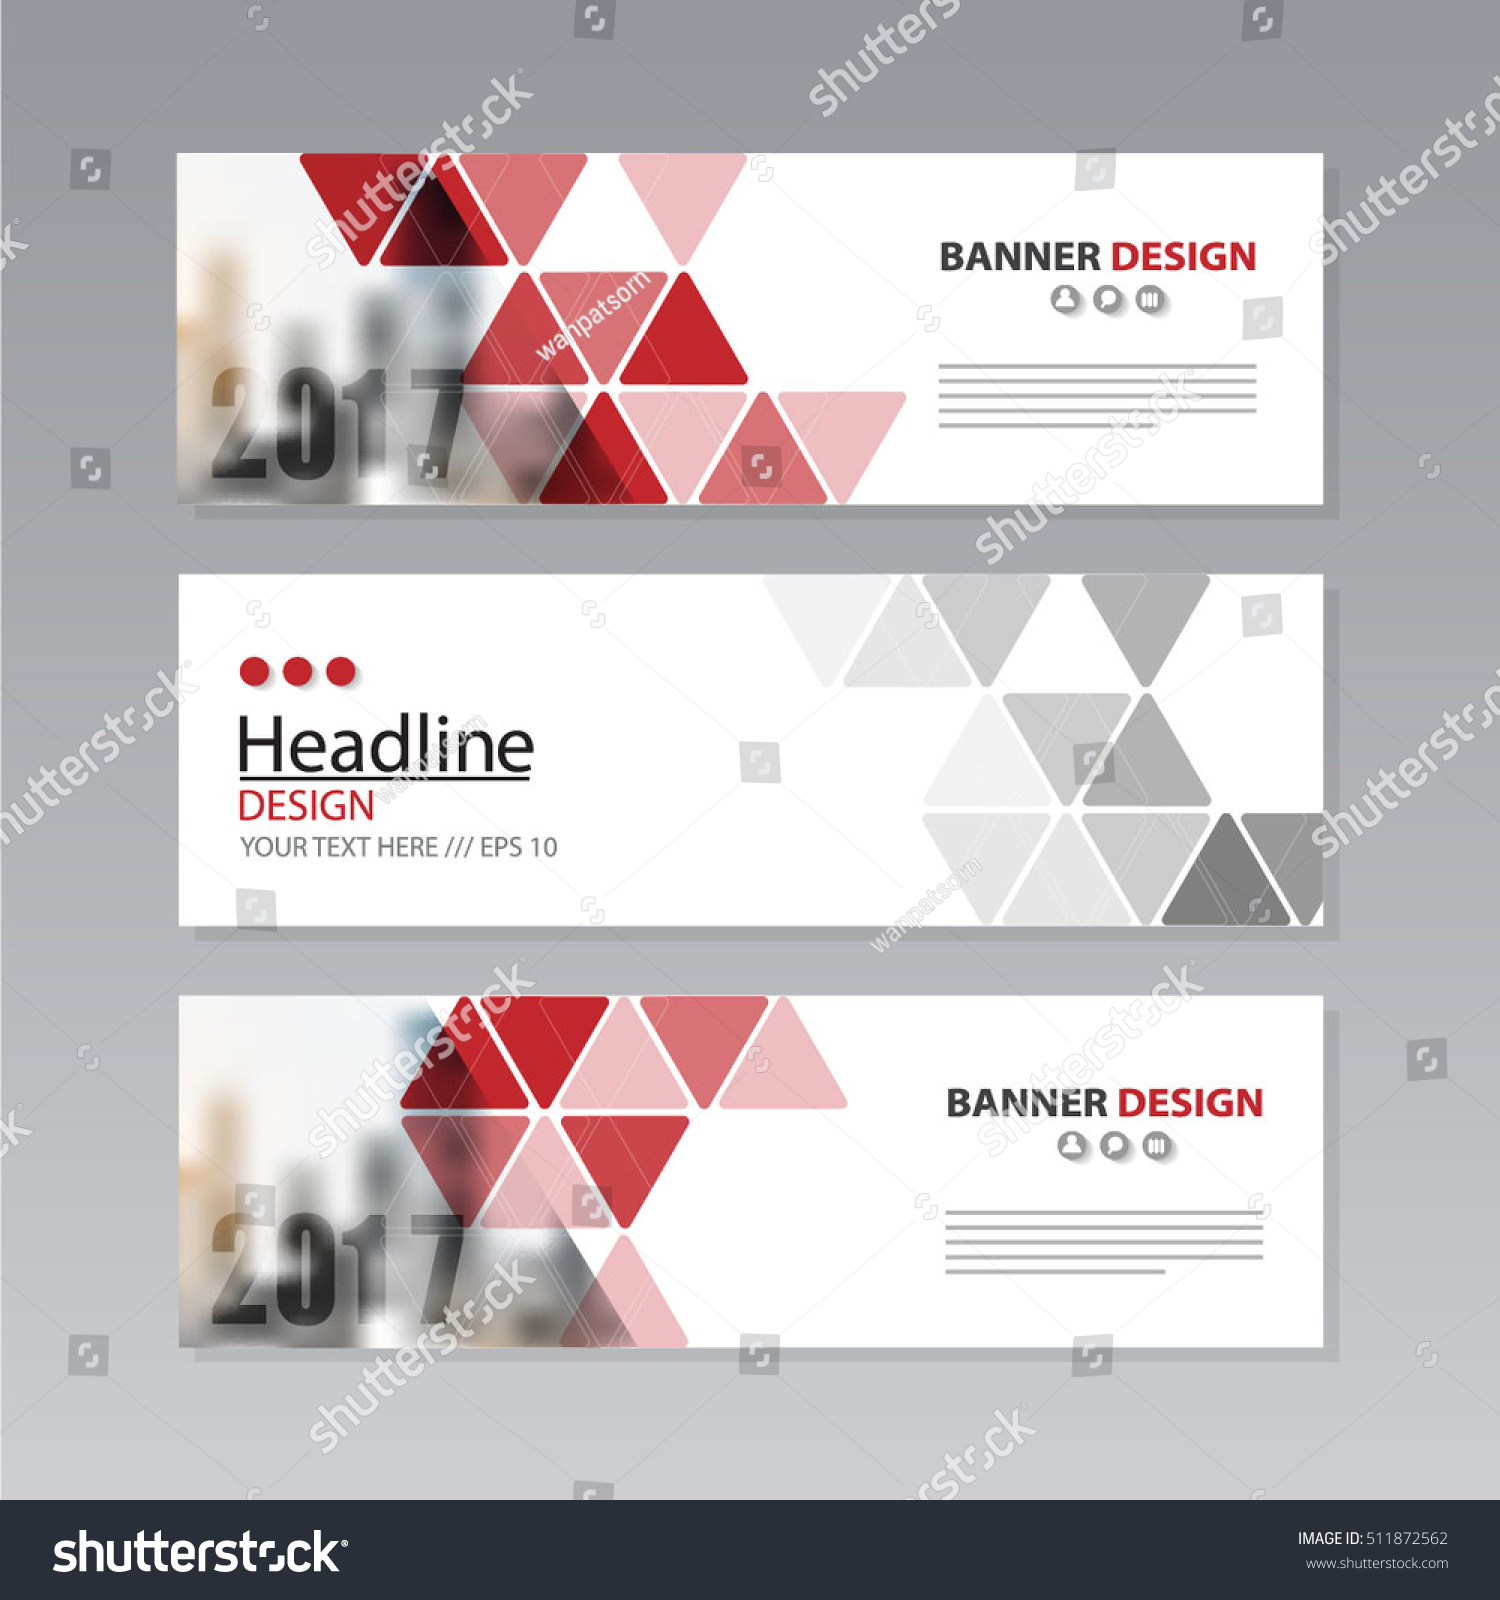 banner business layout template vector design. #511872562